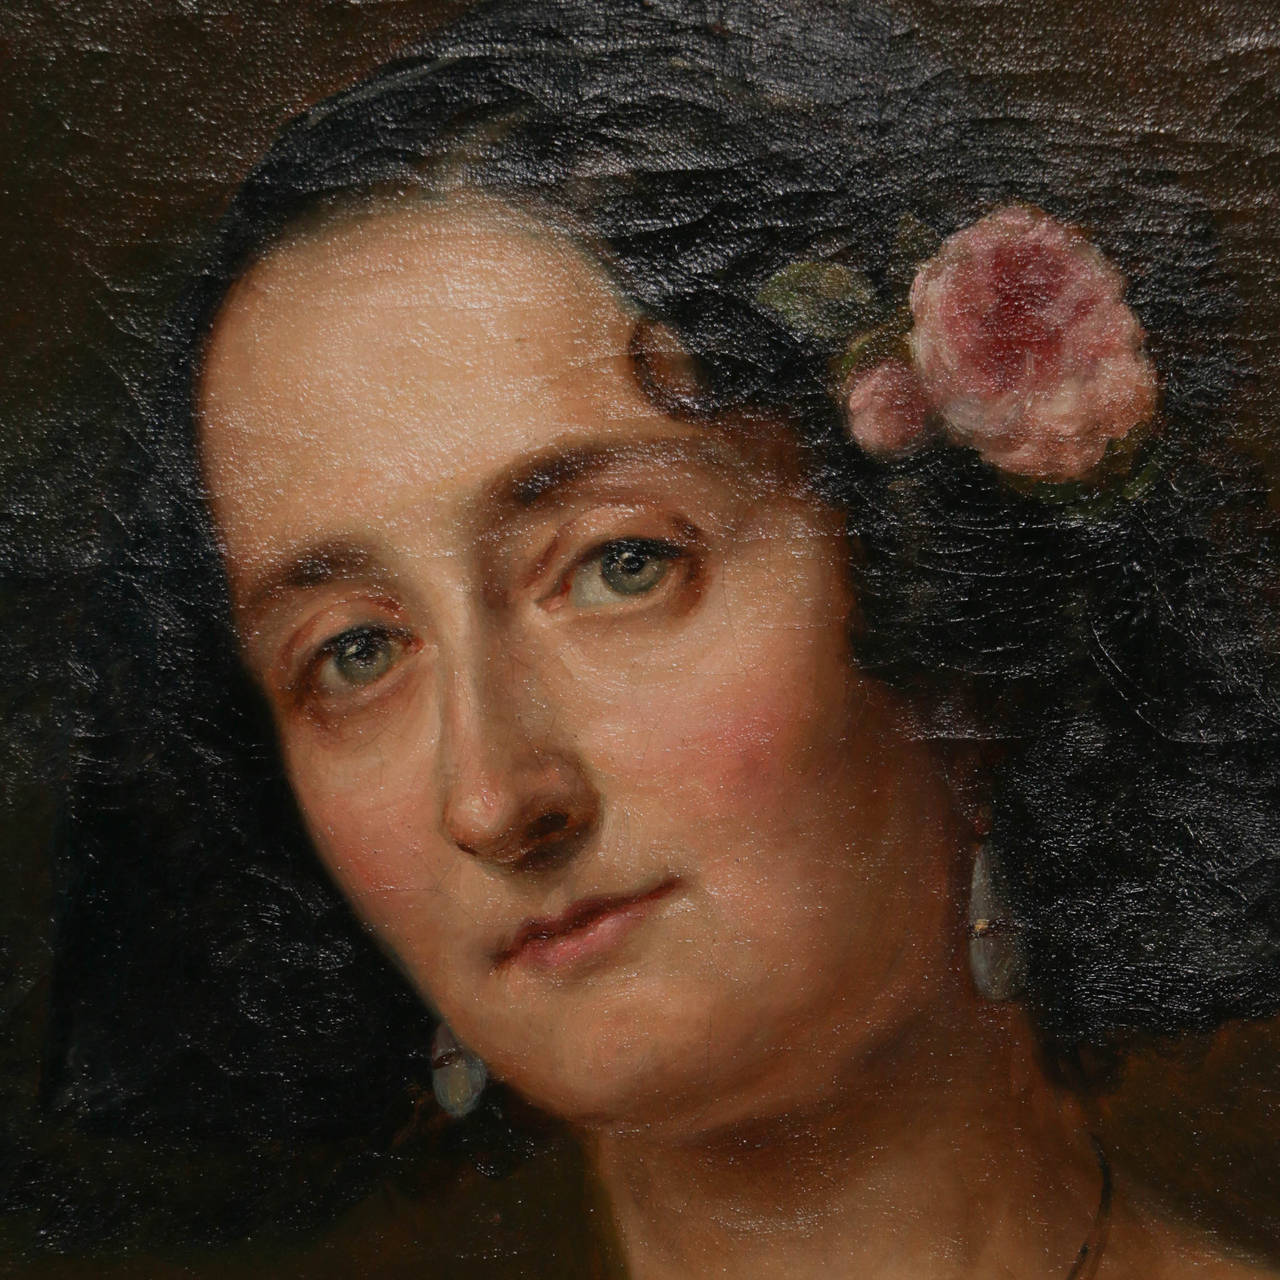 Original oil on canvas painting of Fanny Magdalena in formal black dress and pink flower in her hair by unknown artist. On the stretcher is the name Darsgestellten. Fanny Magdalena of Eckenbrecher, Danelon was born in 1805 and died in 1879 in